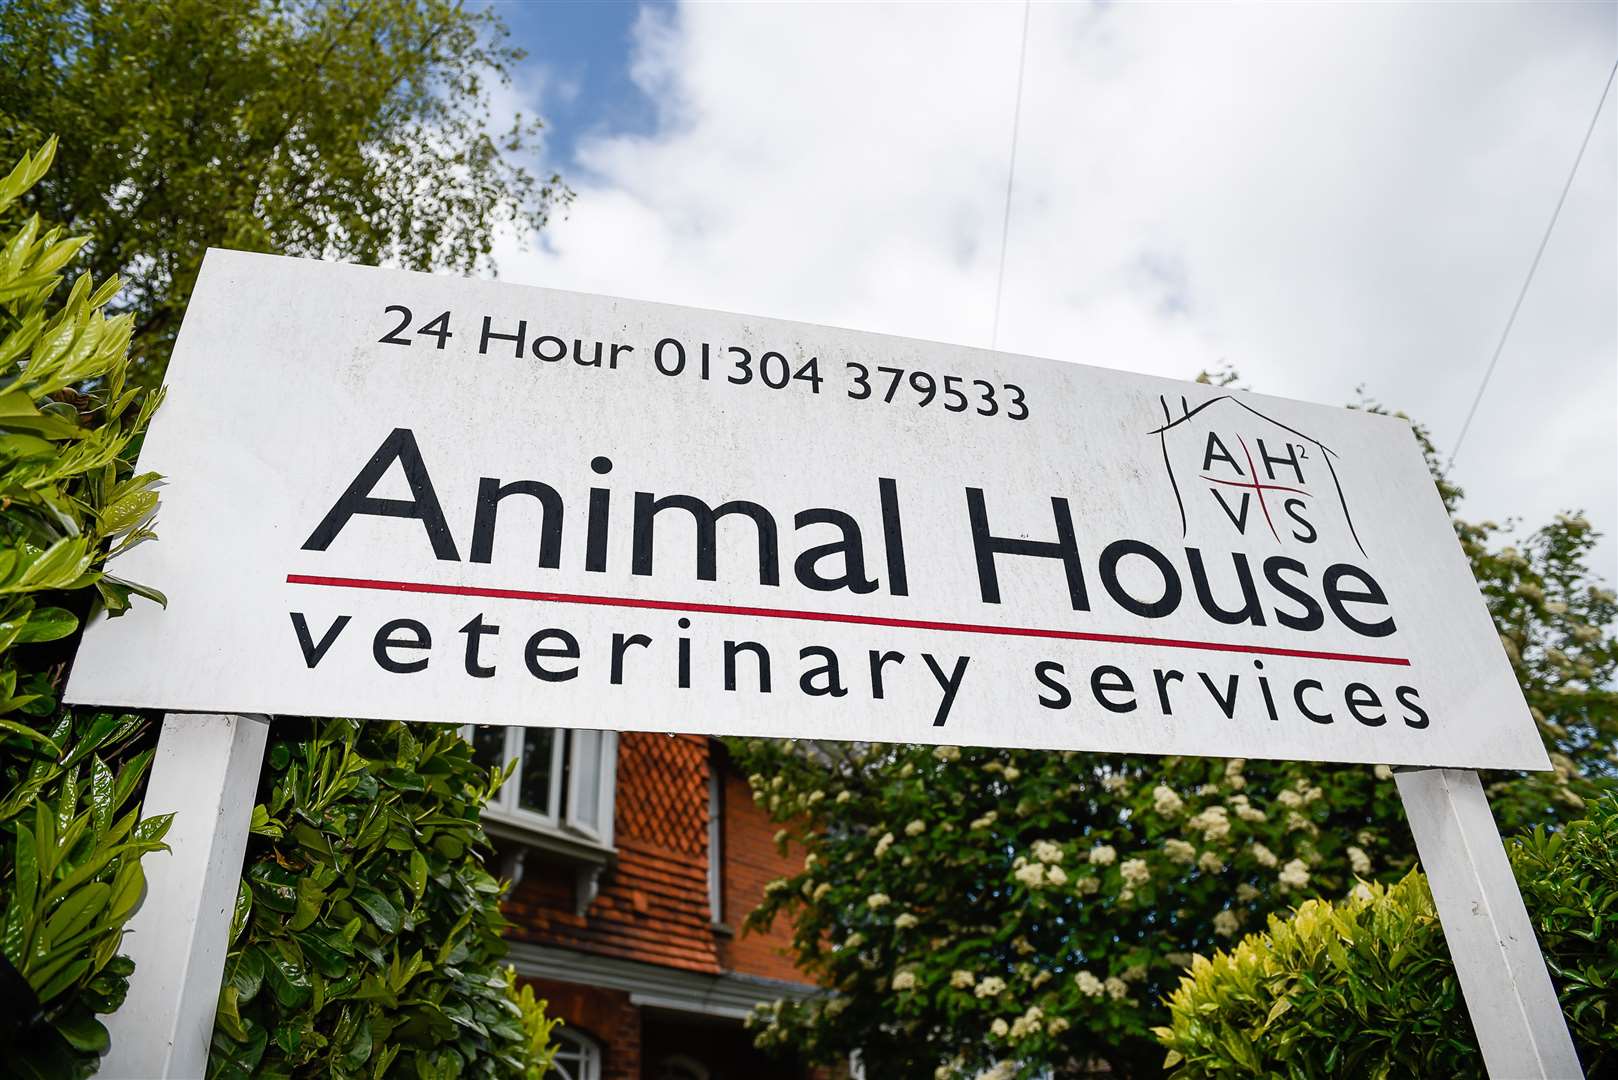 Animal House vets in Deal is operating on a one in one out basis to avoid large number gathering in its waiting room Picture: Alan Langley